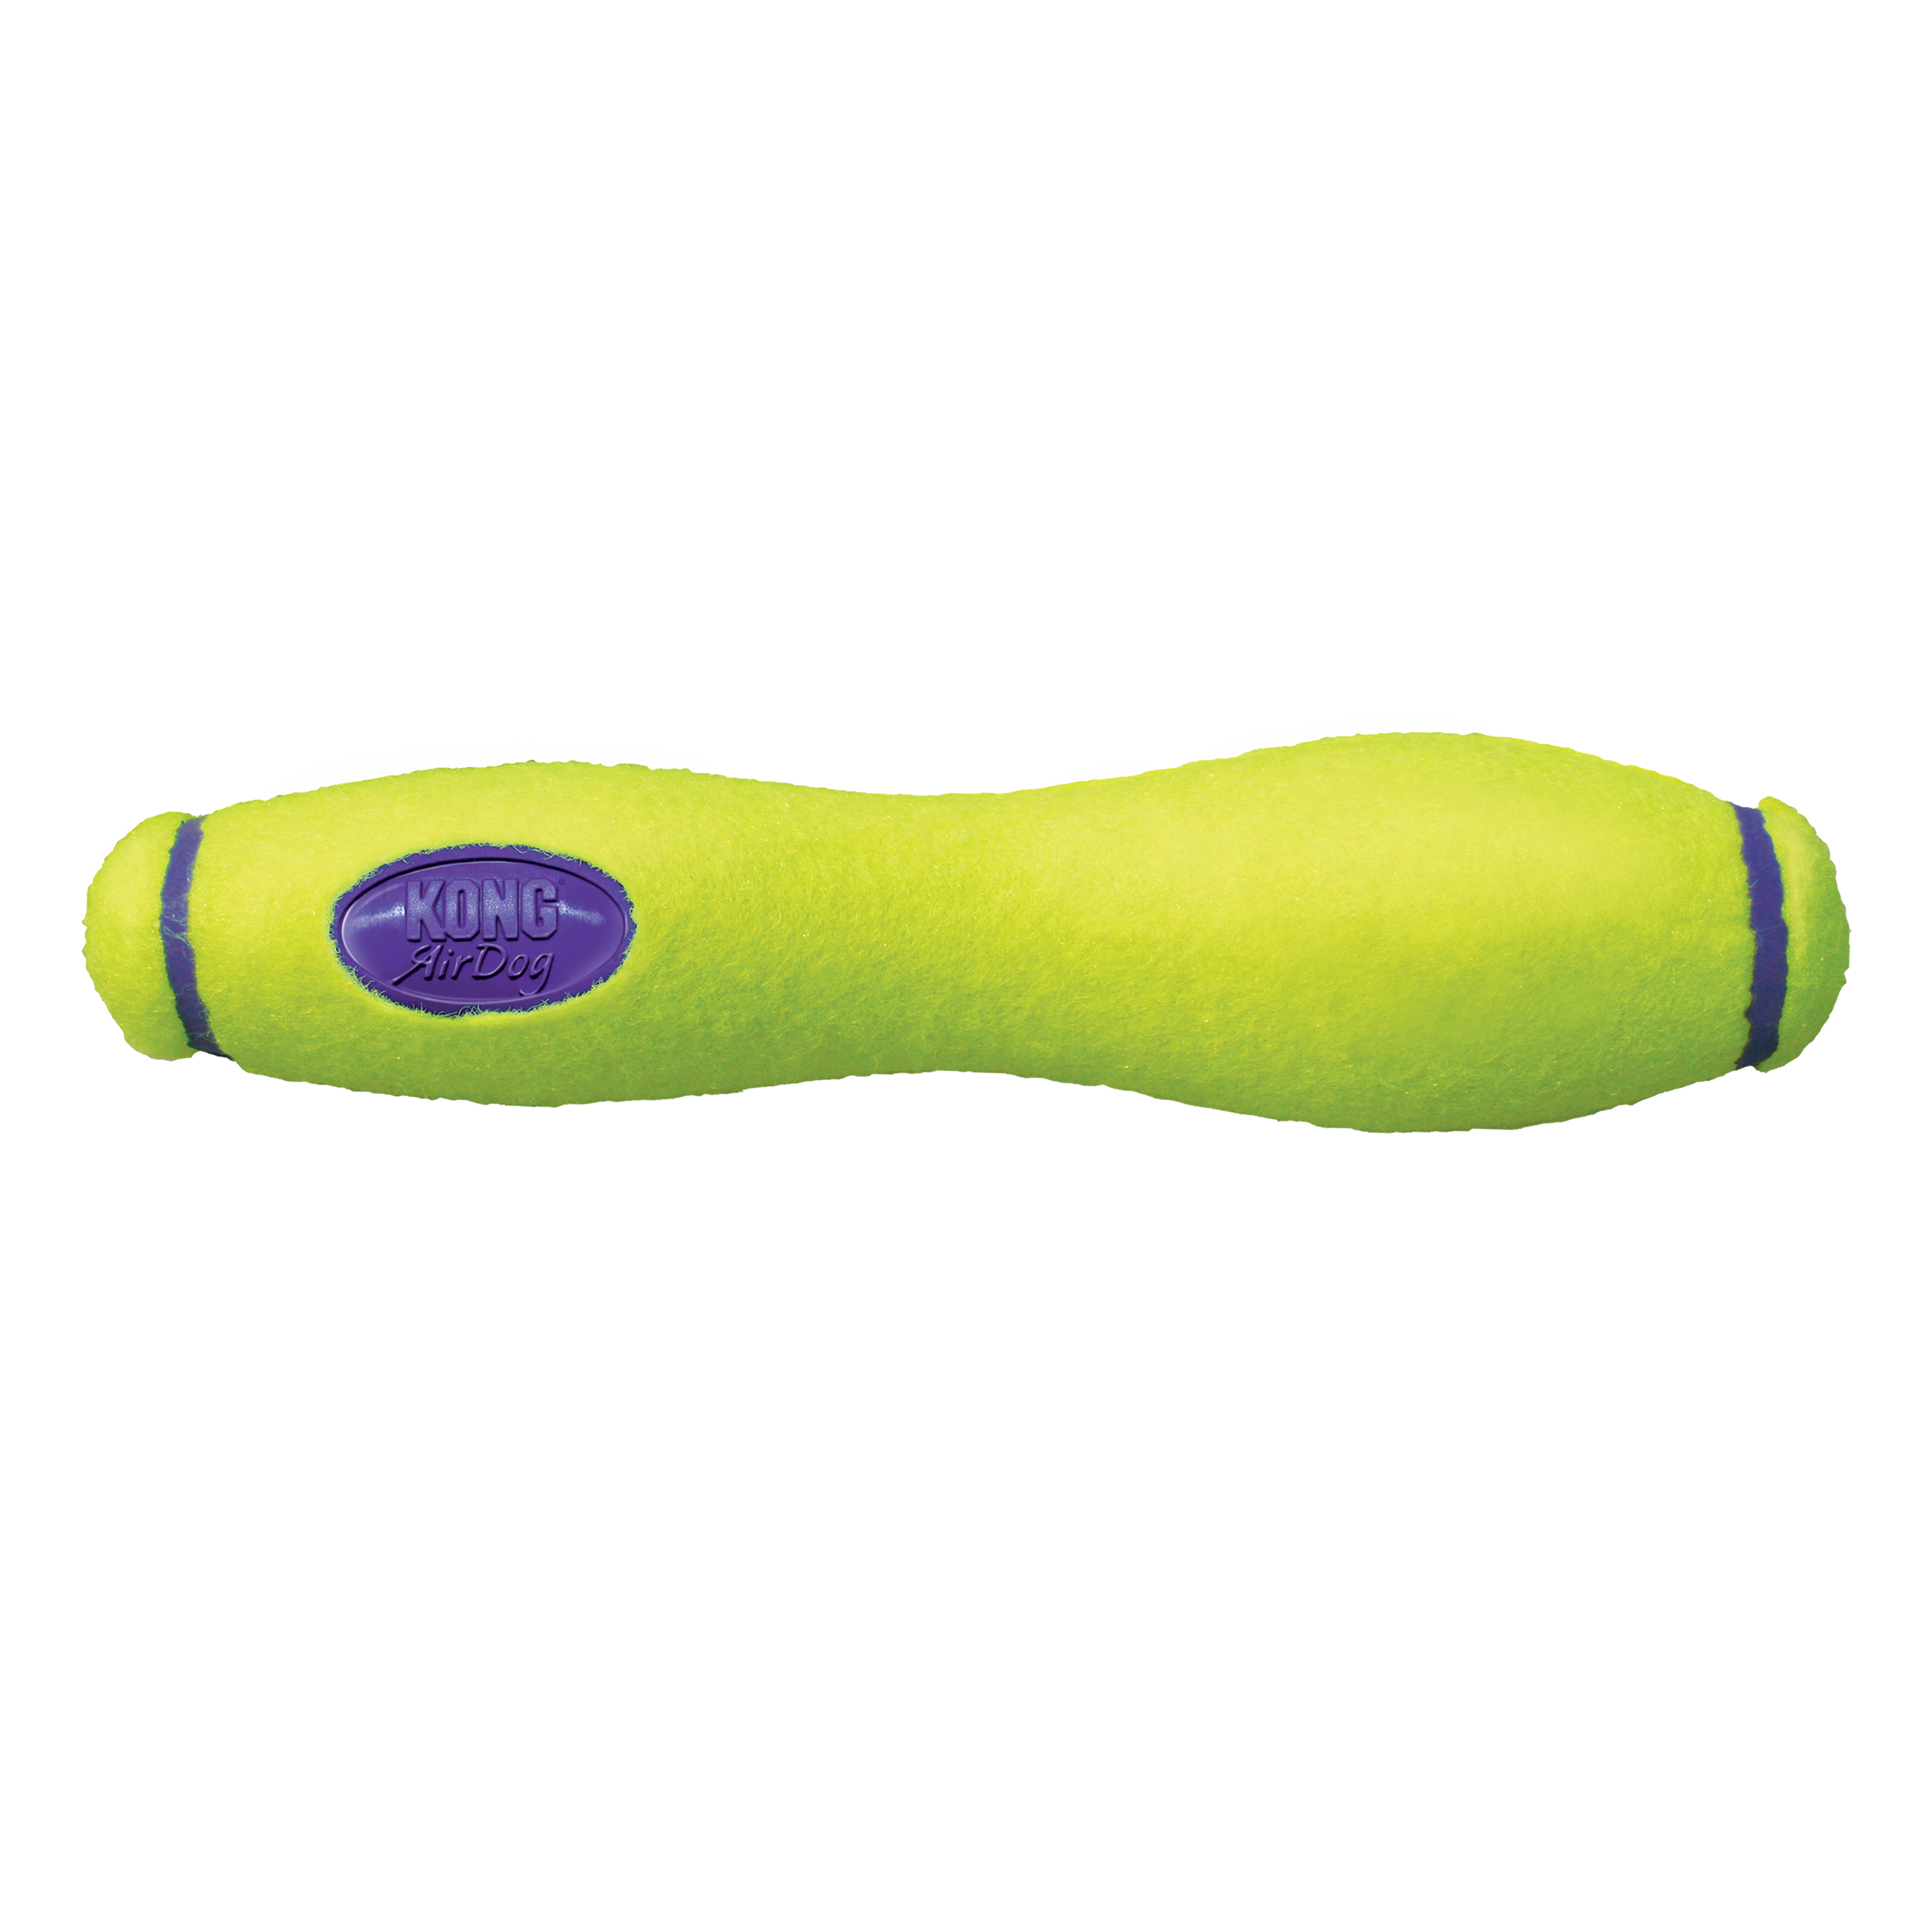 Imagen del producto AirDog Stick offpack